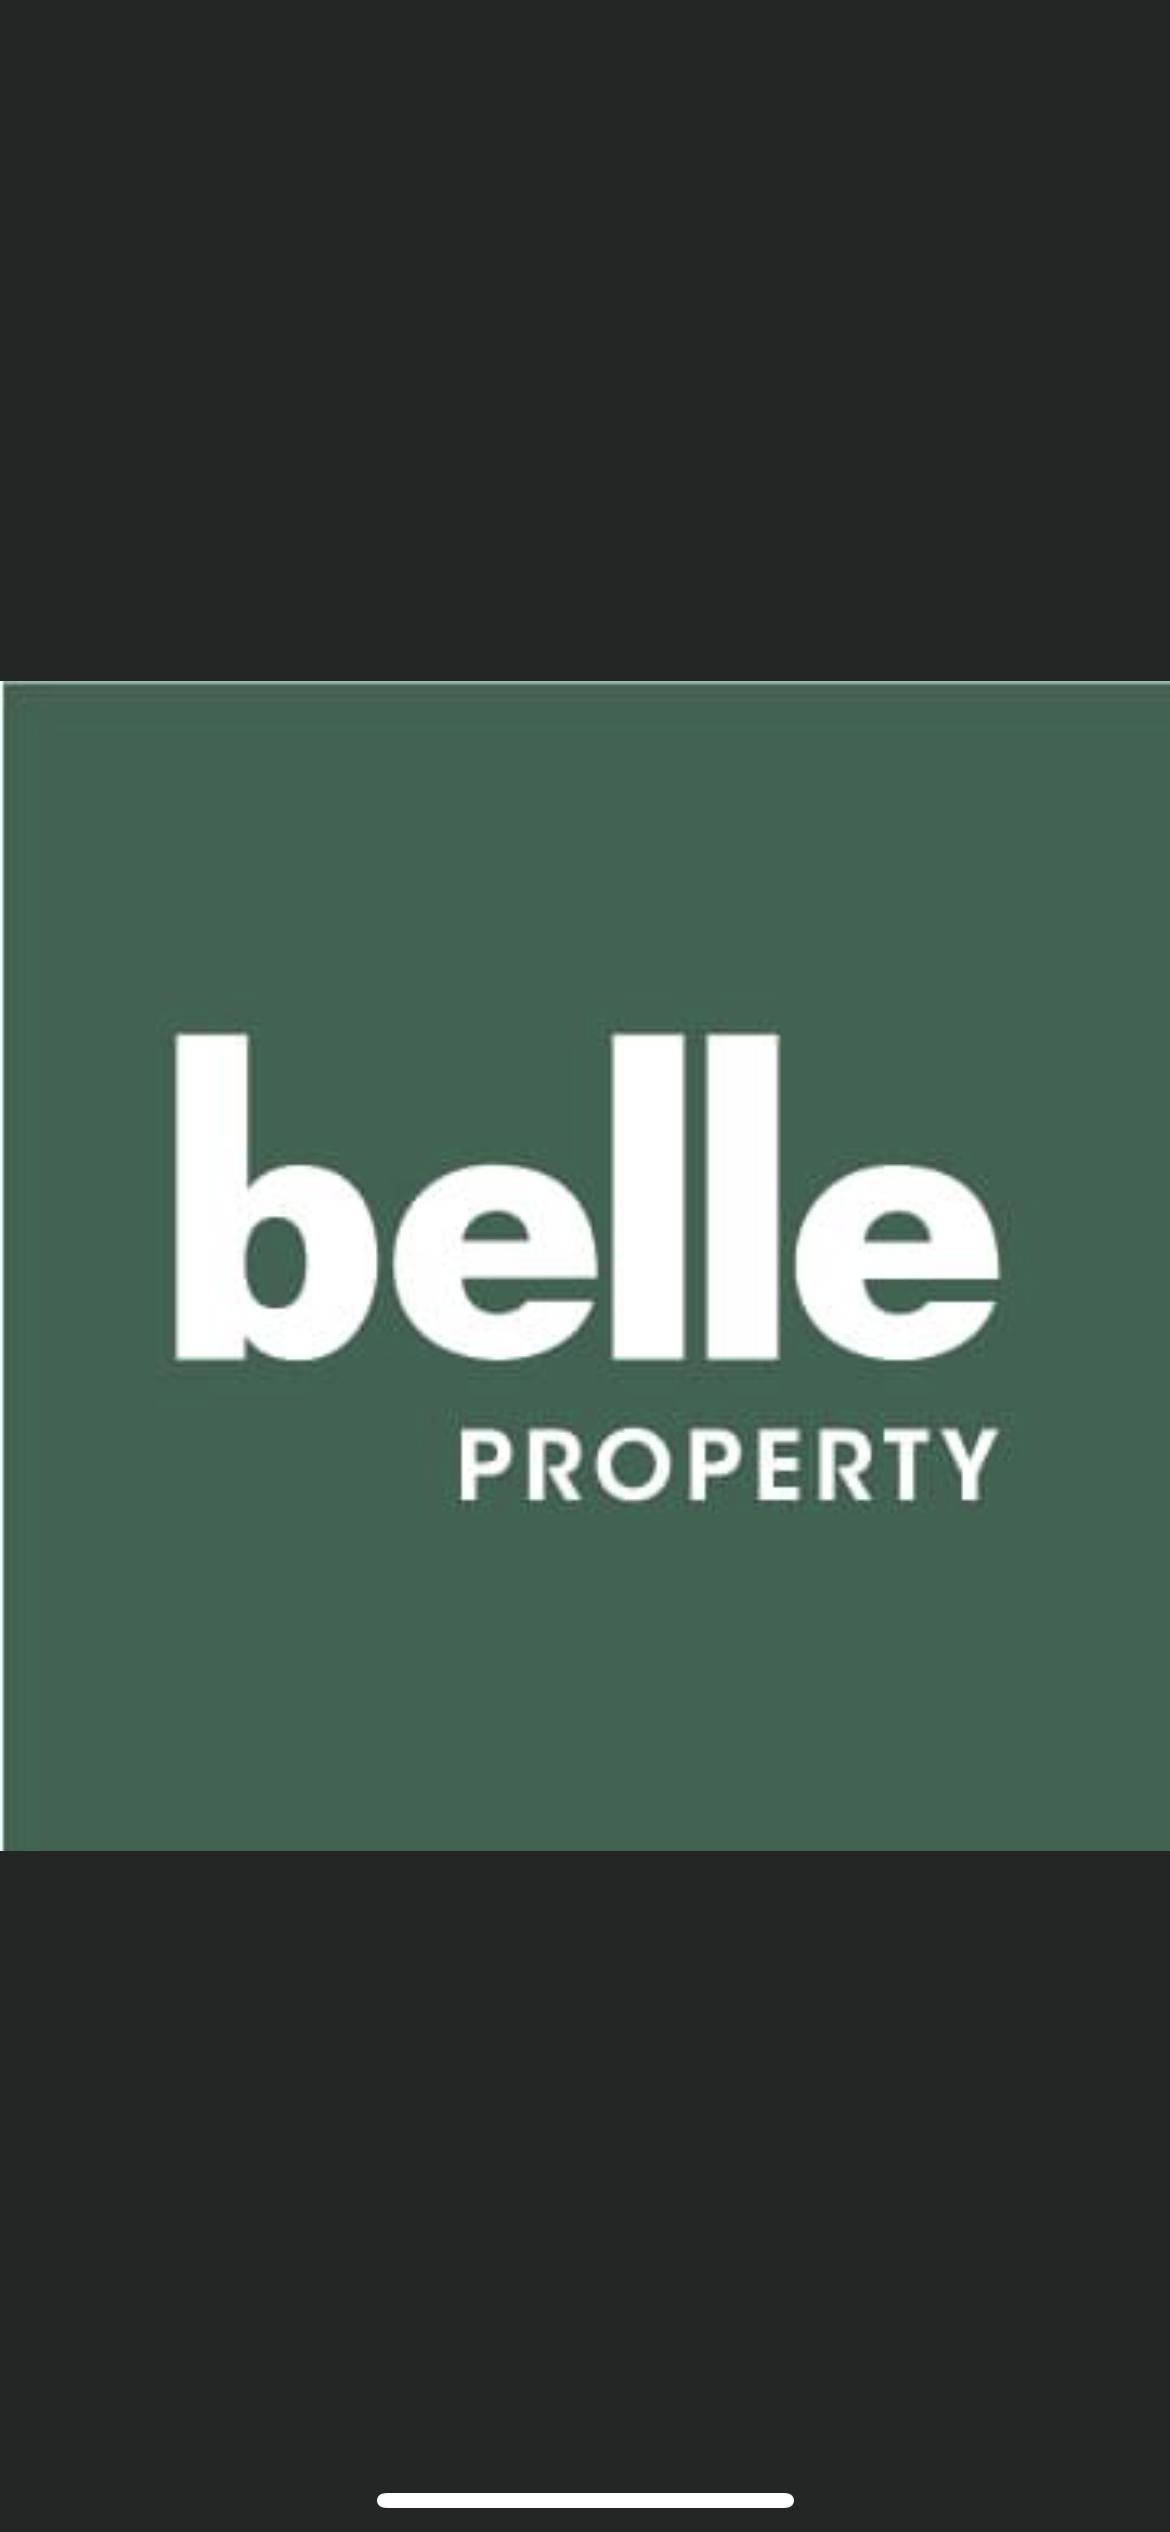 Belle Property Townsville City | real estate agency | 137 Ingham Rd, West End QLD 4810, Australia | 0747266000 OR +61 7 4726 6000